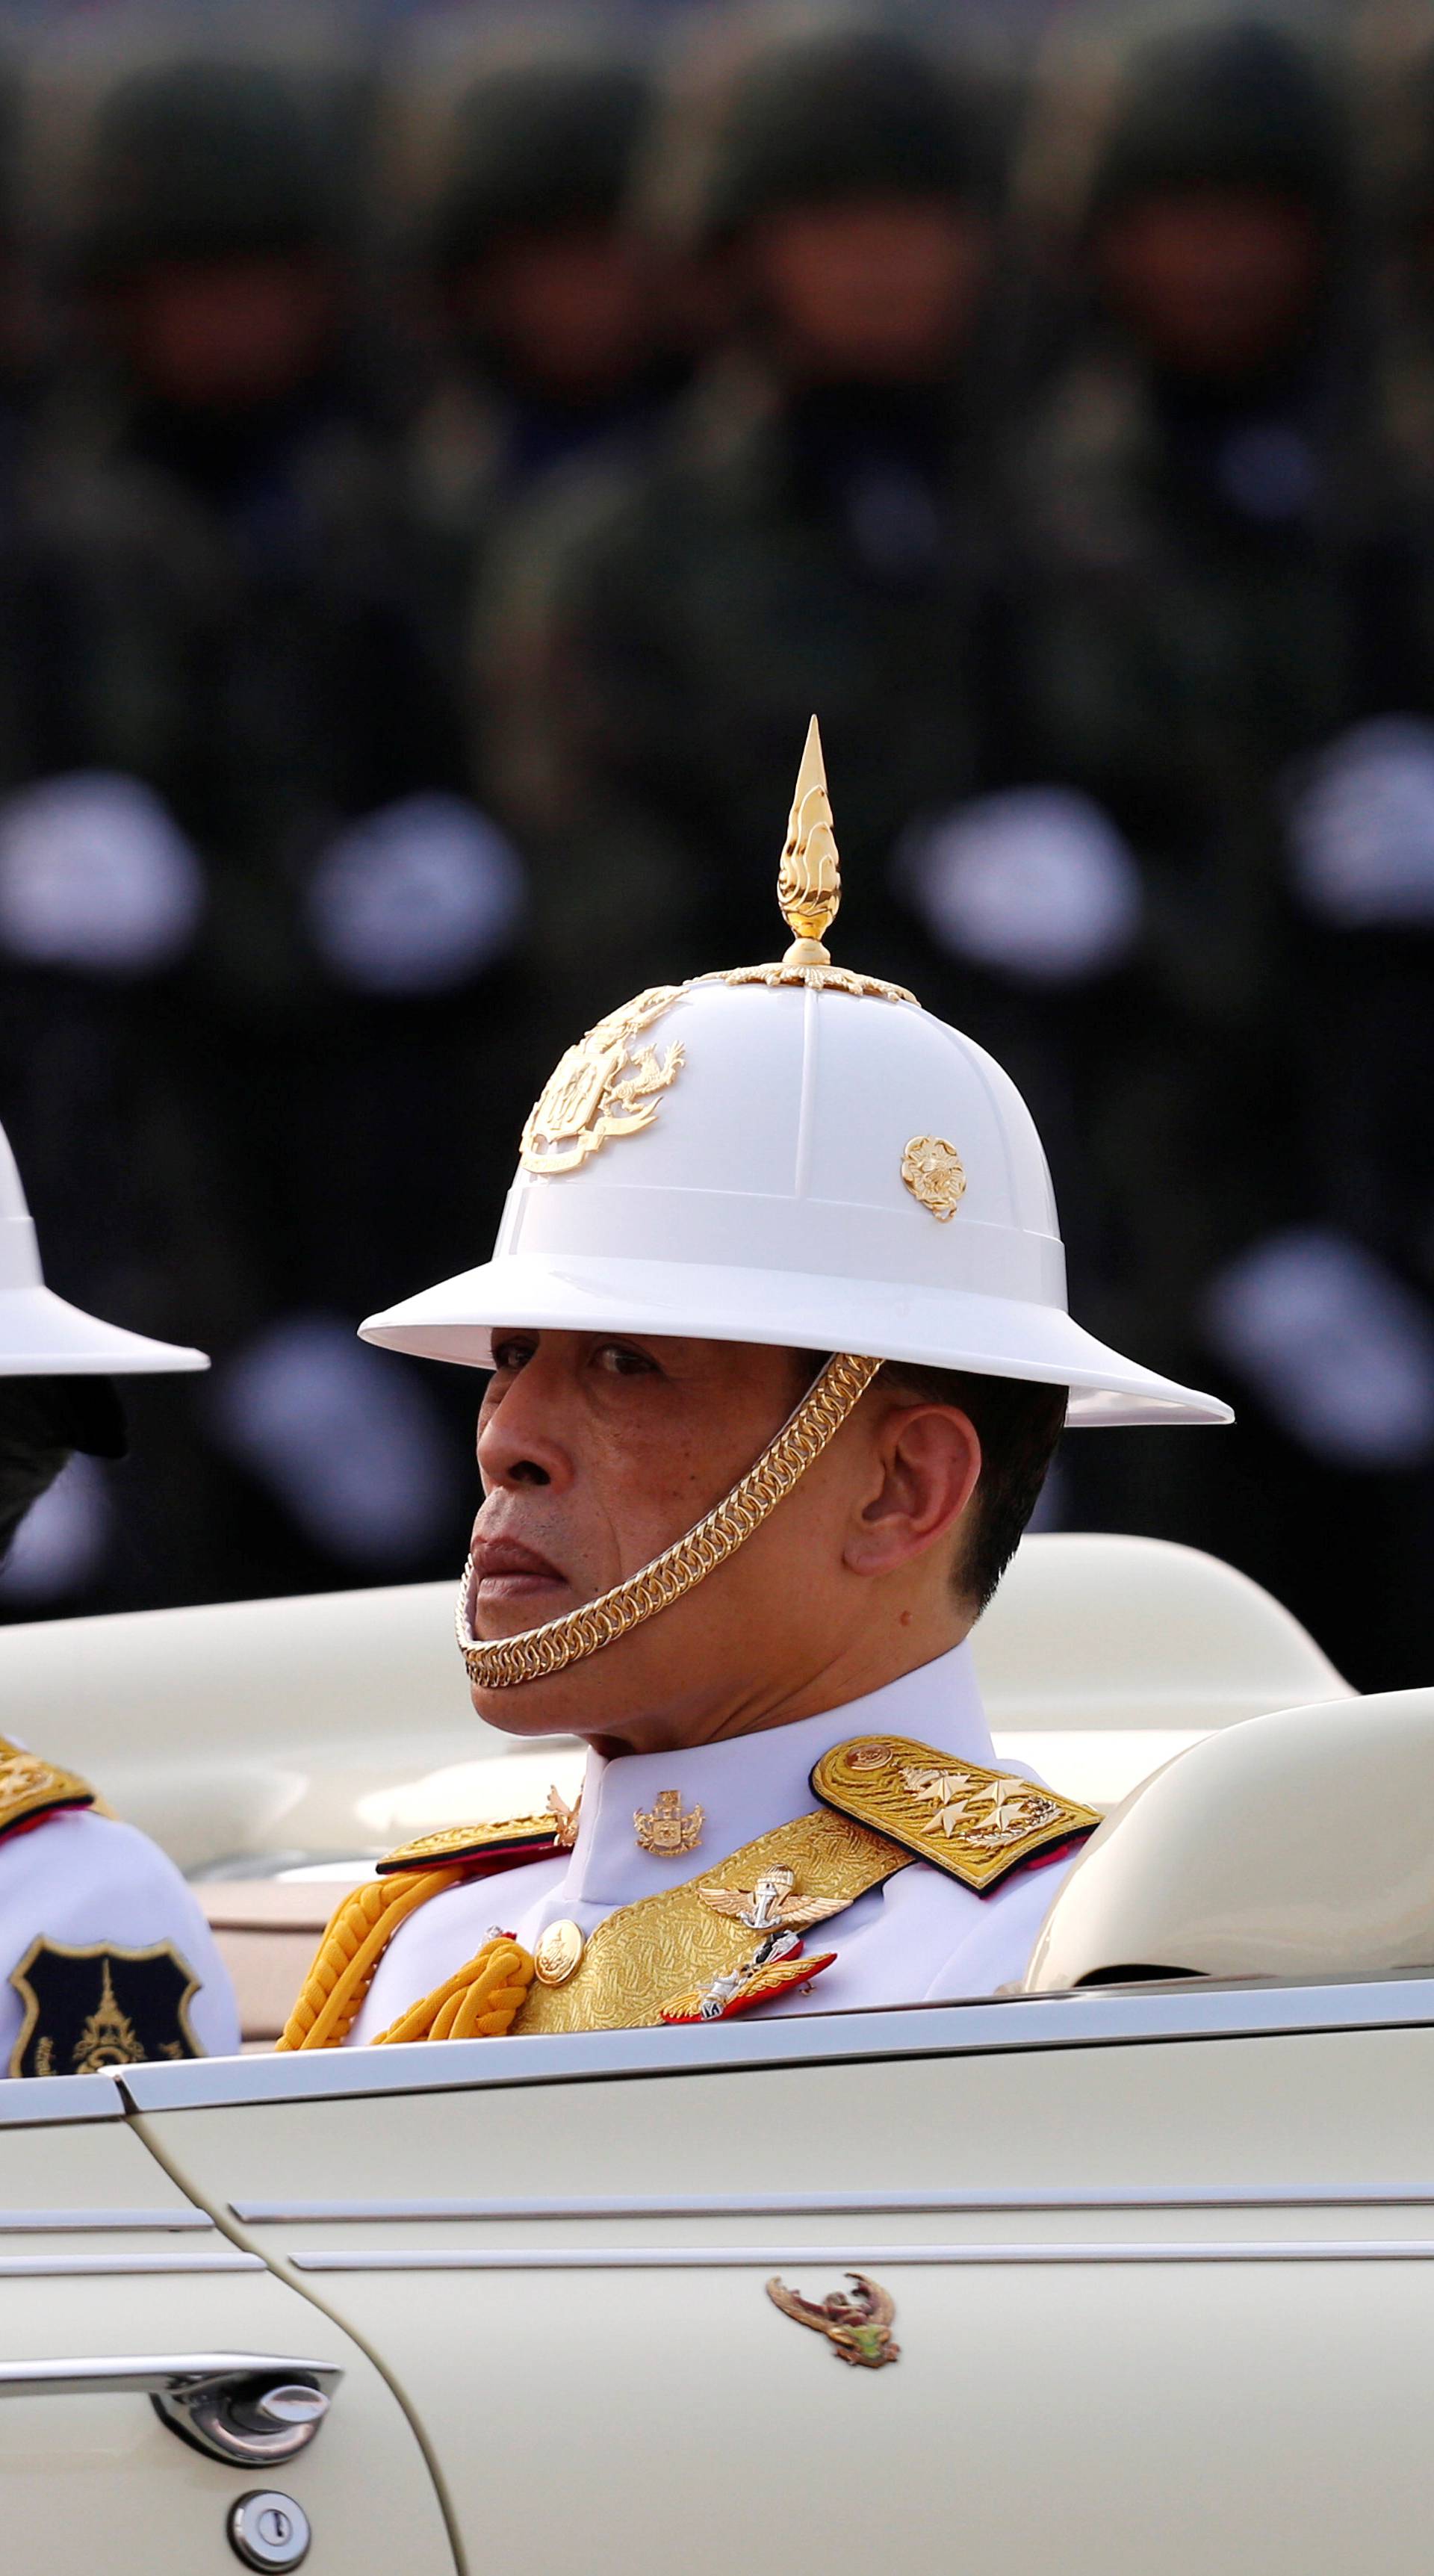 King Maha Vajiralongkorn and Queen Suthida attend the annual Military Parade to celebrate the Coronation of King Rama X at the Royal Thai Army Cavalry Center in Saraburi province